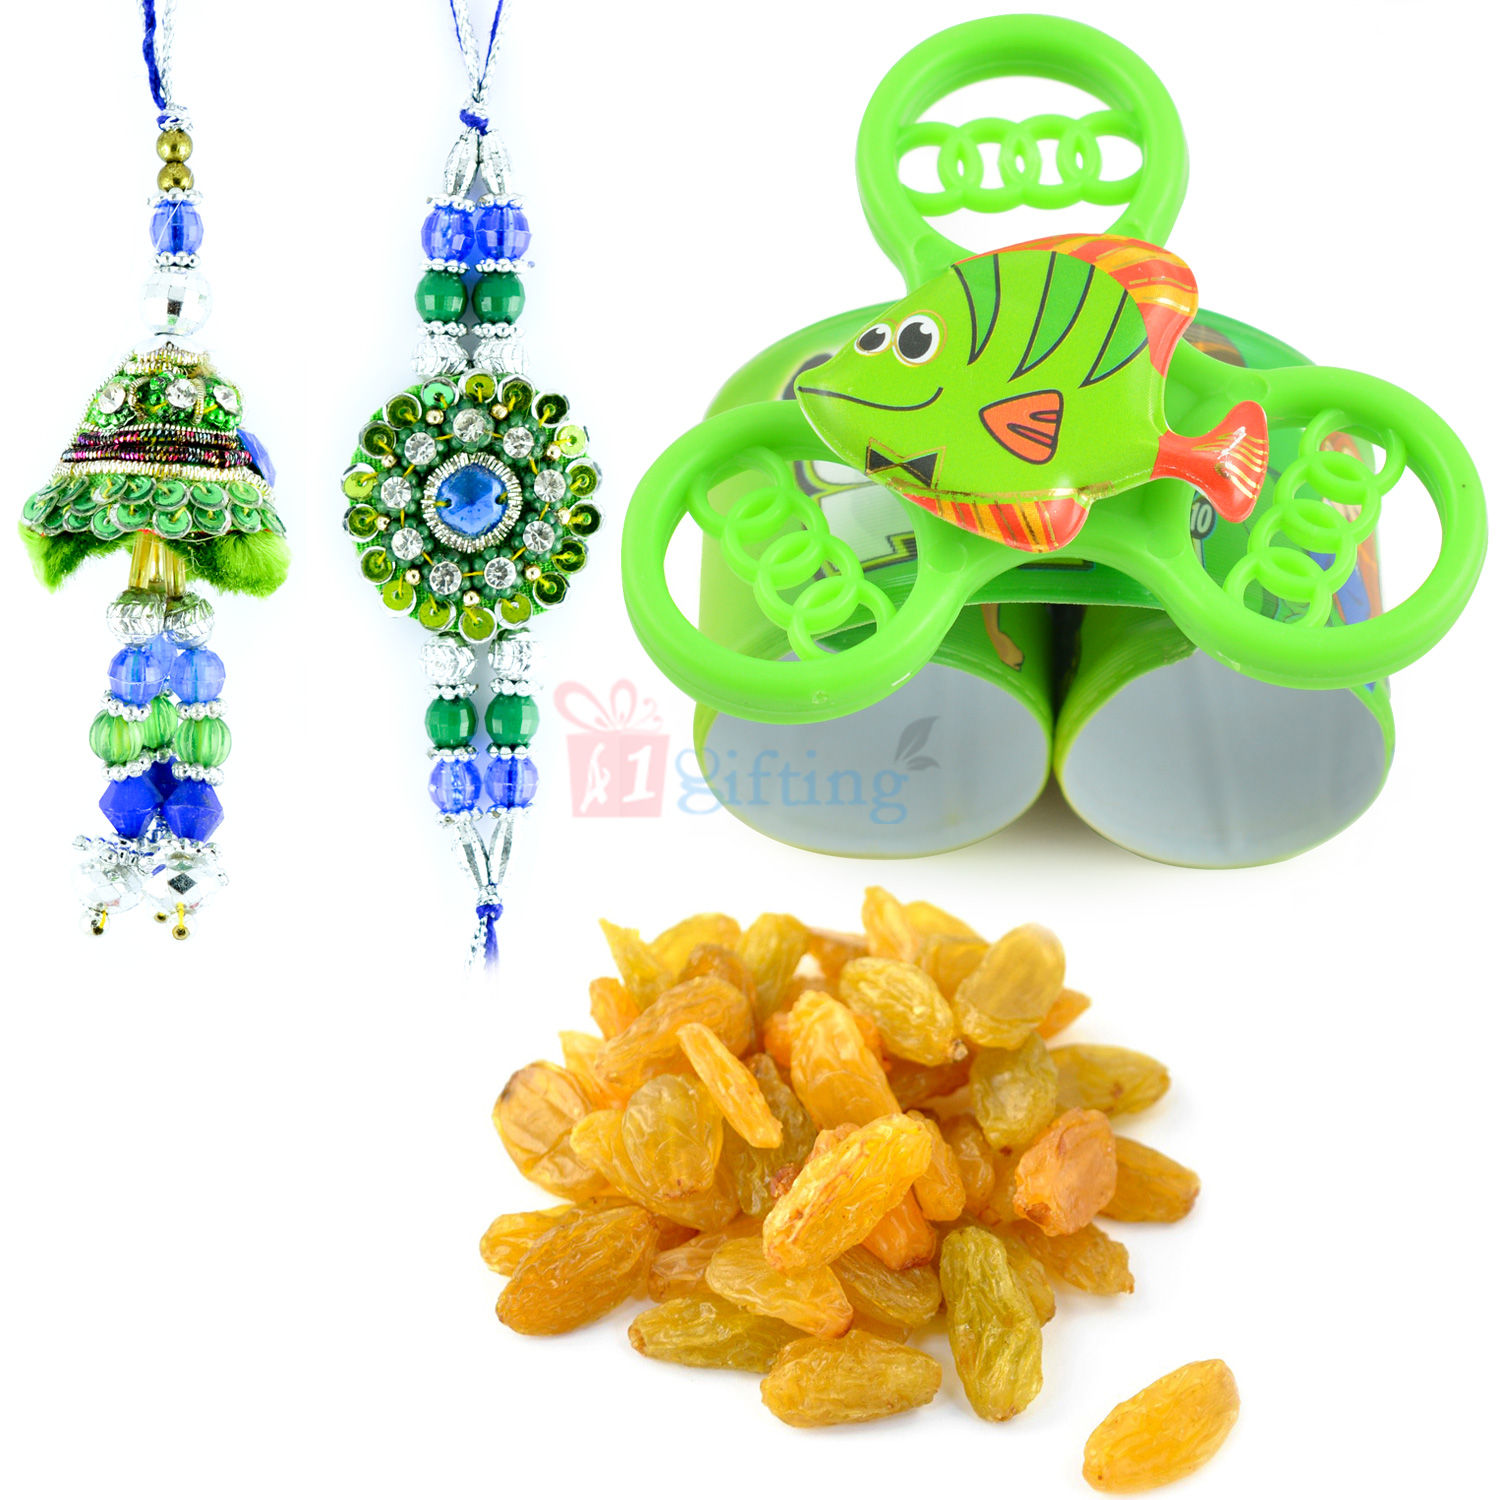 Kishmish with Kids Toy and Awesome Pair Rakhi